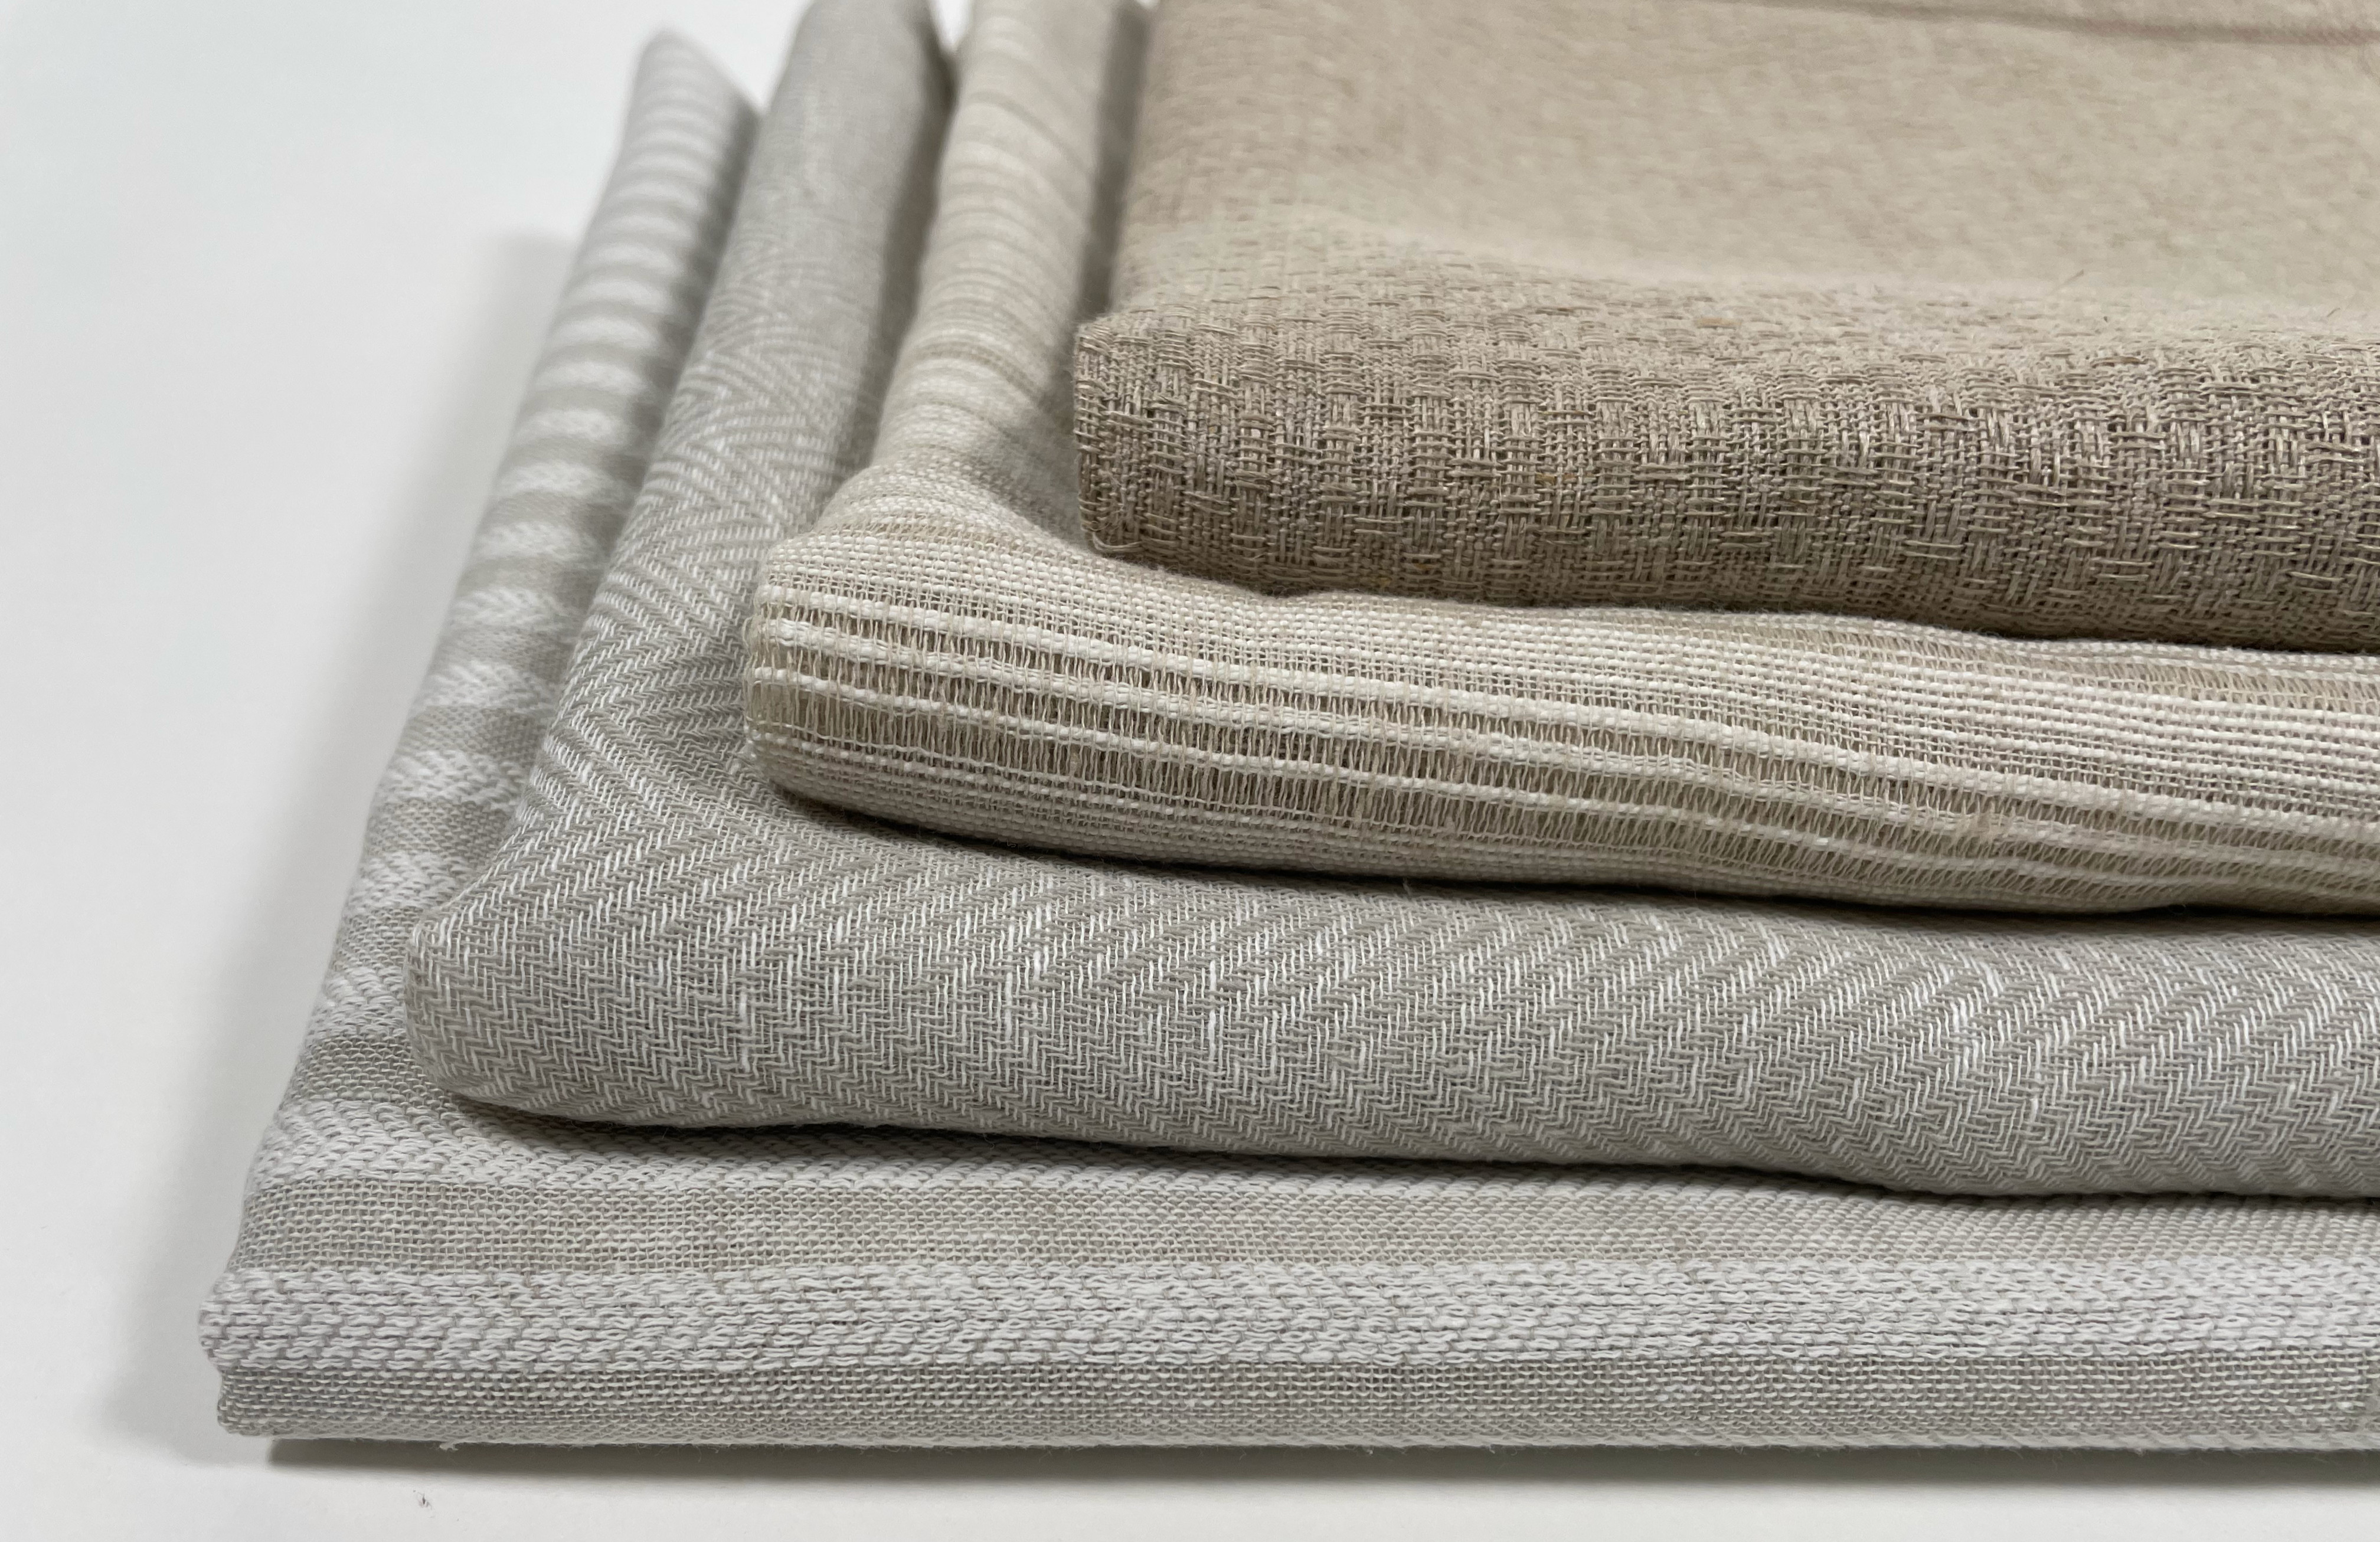 A few neutral fabrics are arranged in a stack.